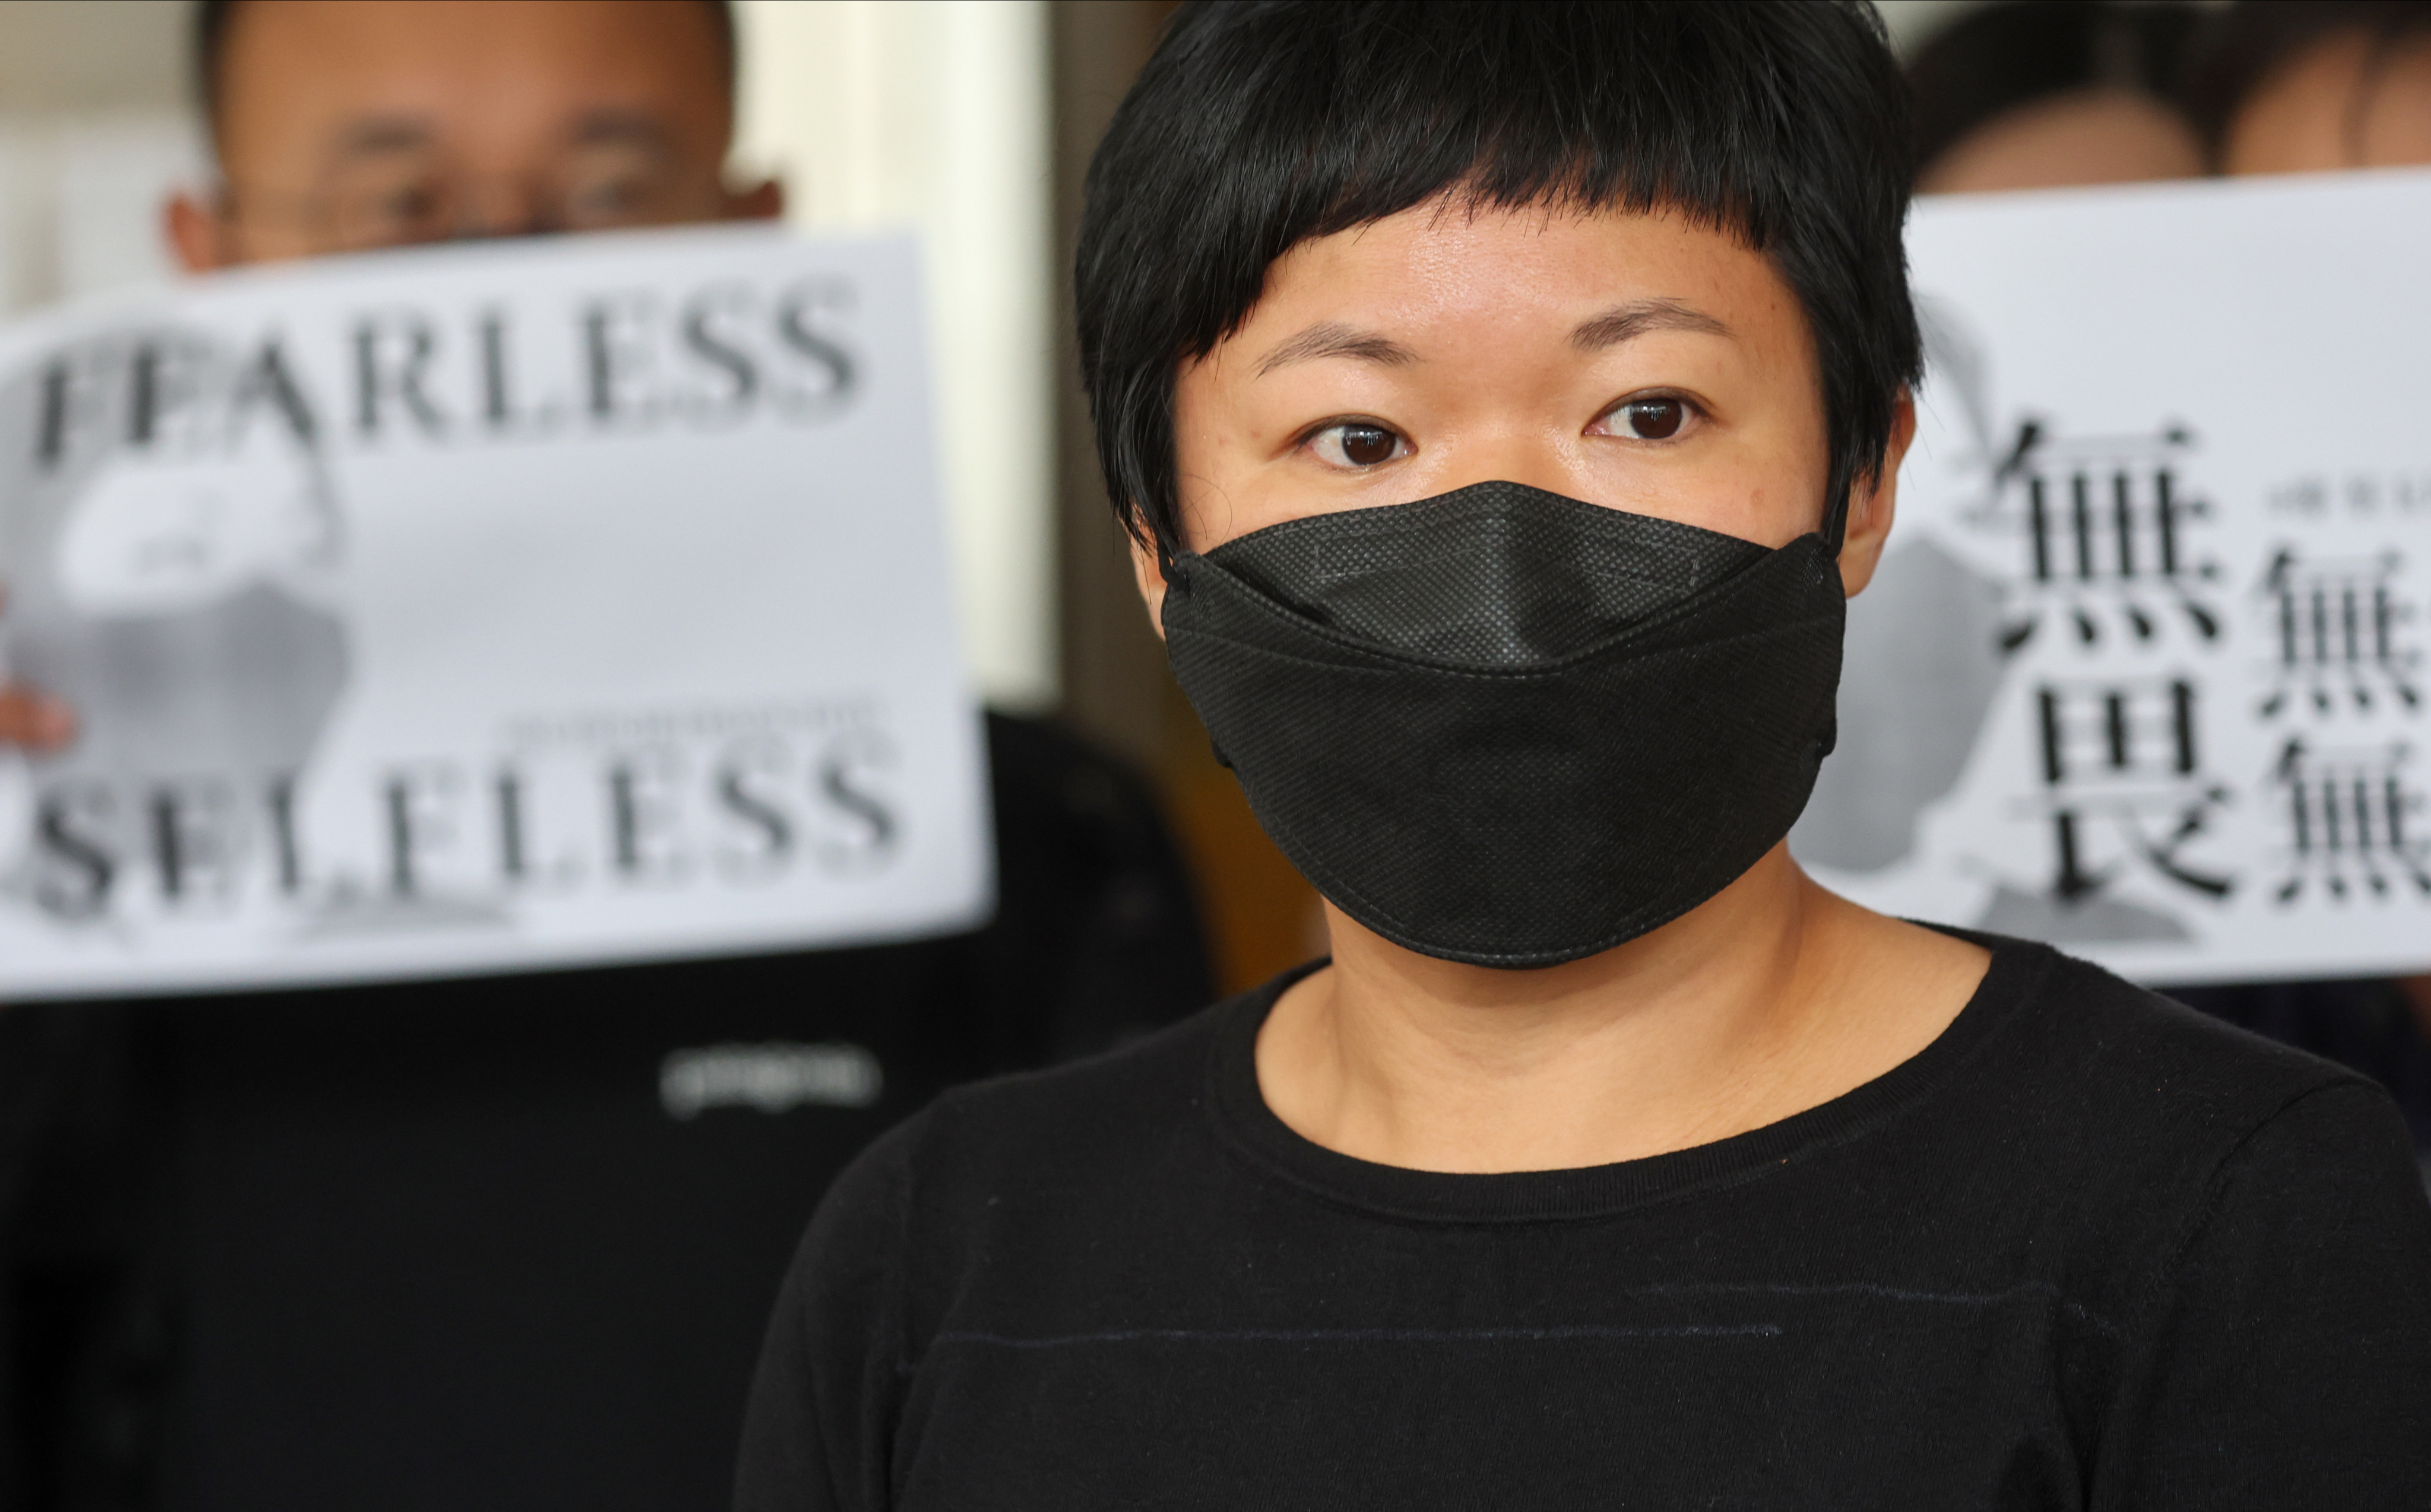 Bao Choy recently lost a High Court appeal against her conviction. Photo: Edmond So